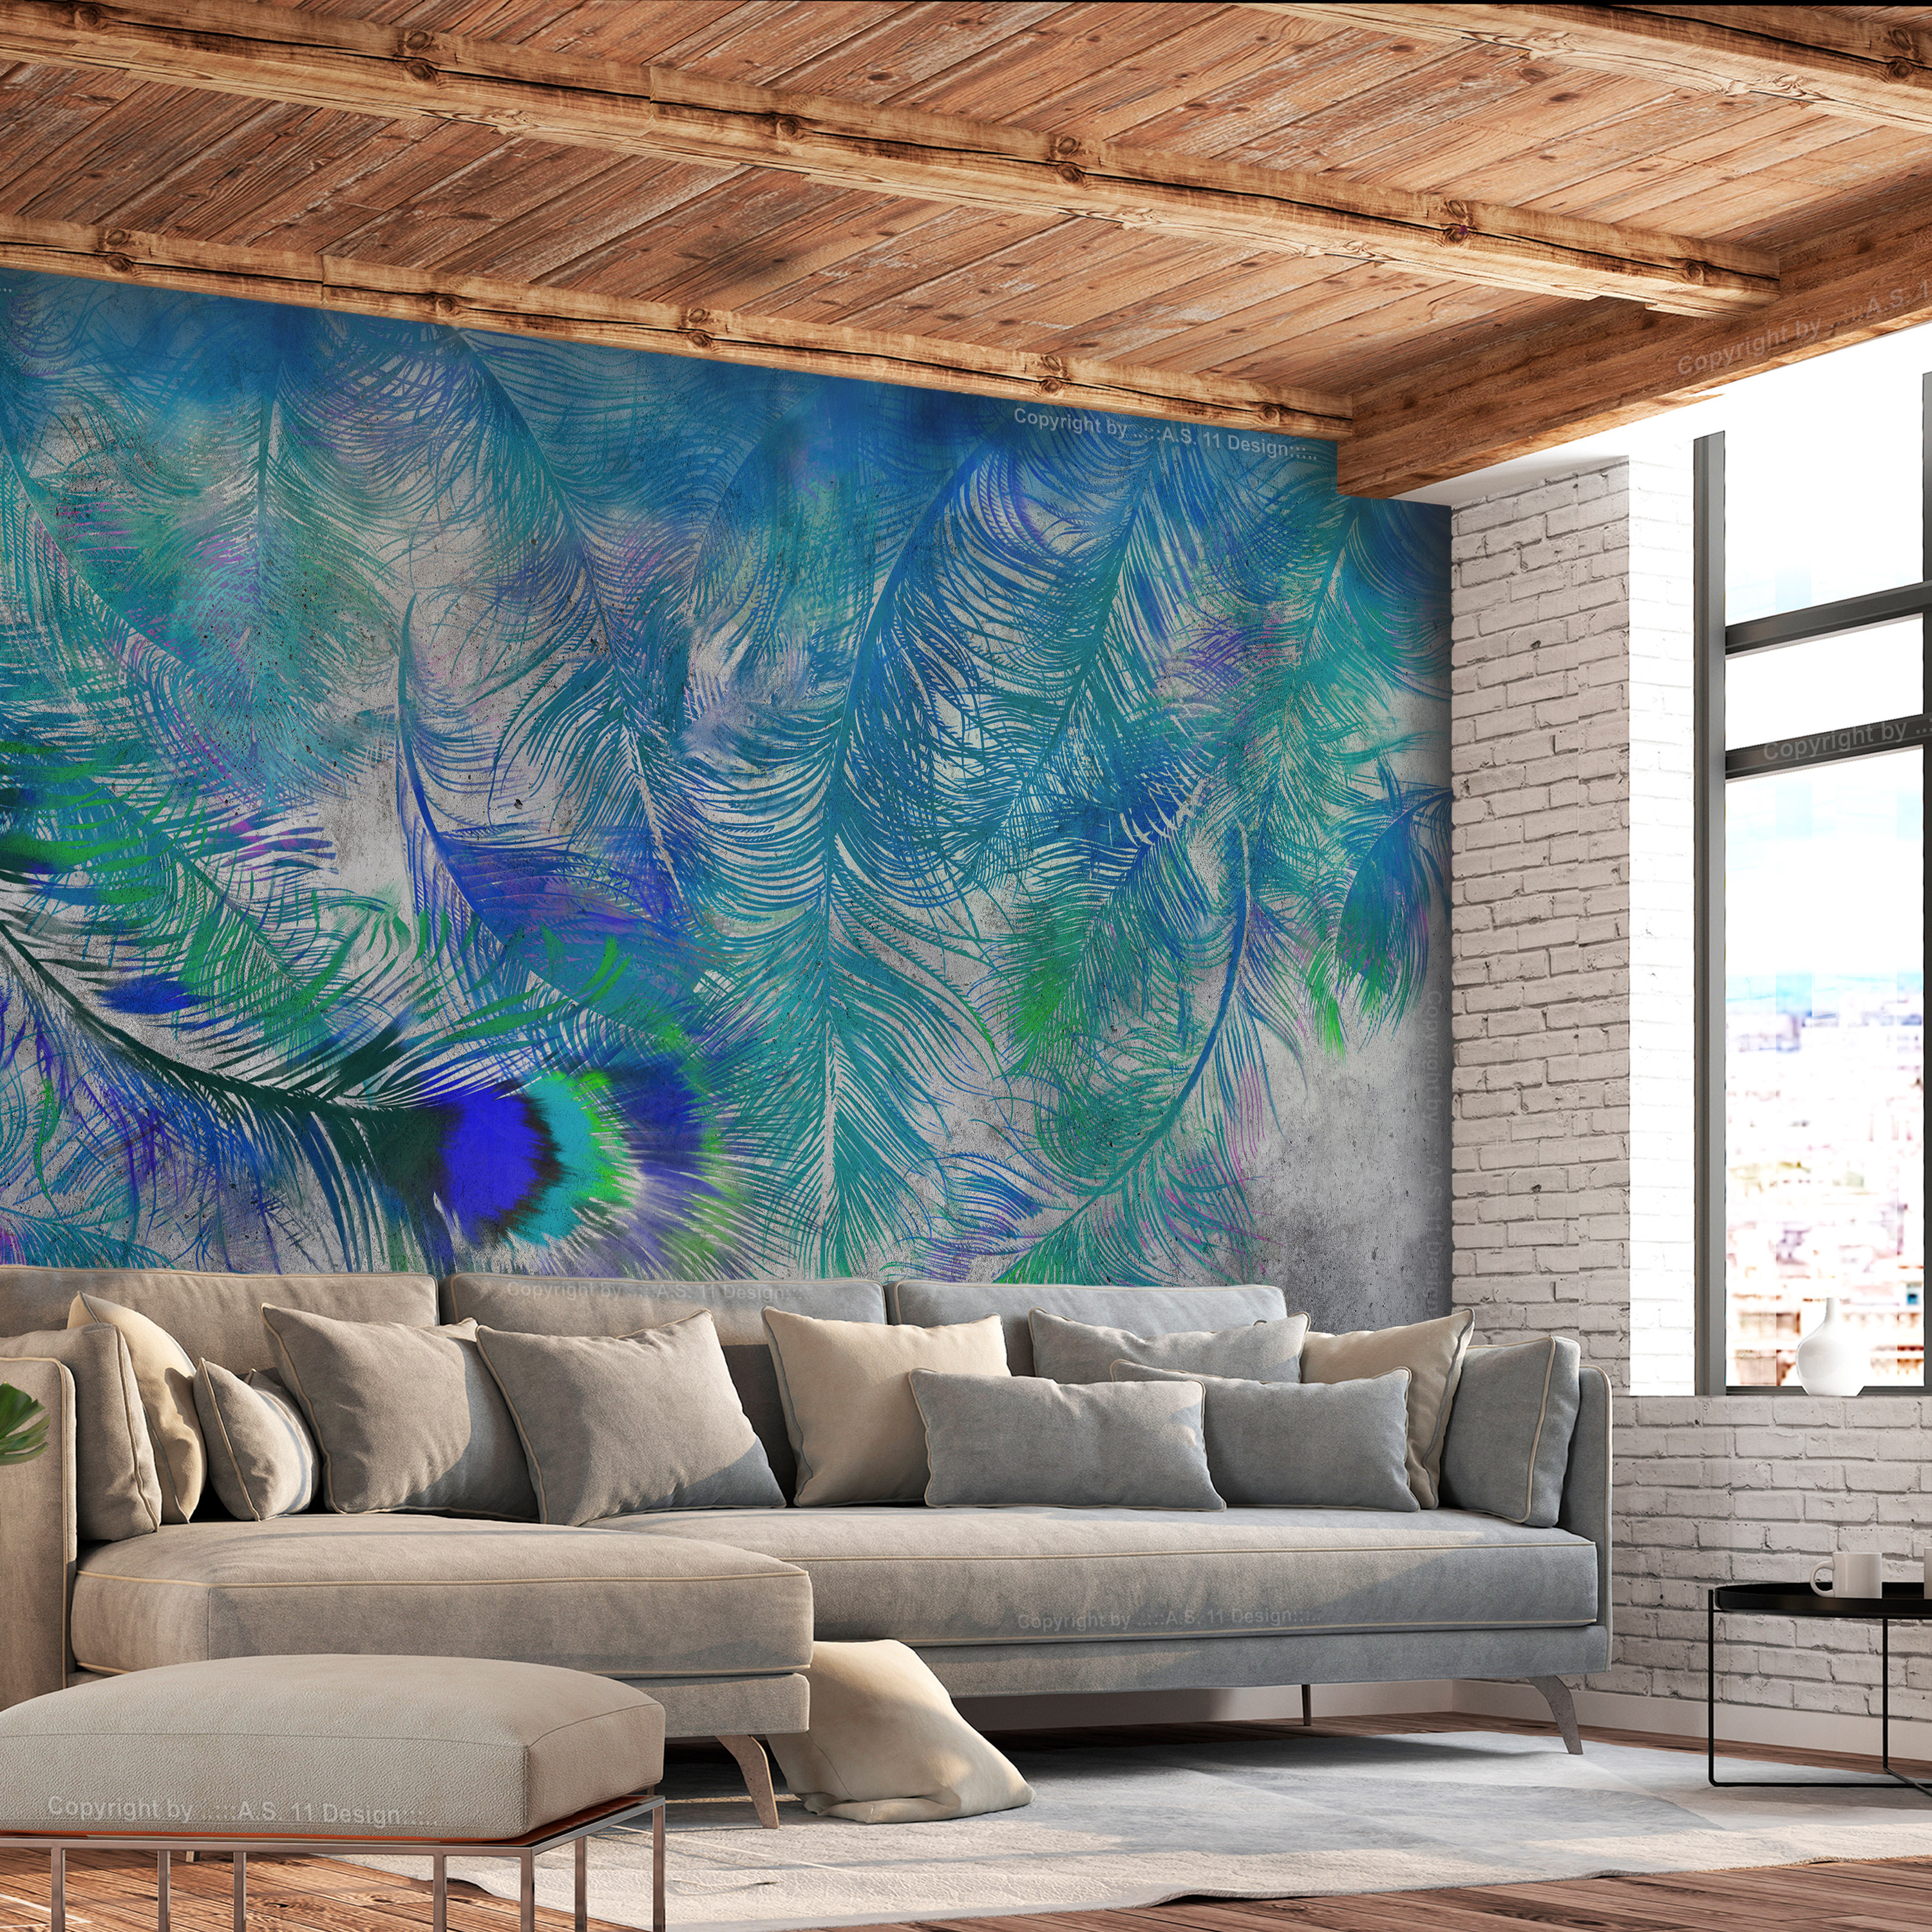 Self-adhesive Wallpaper - Peacock Feathers - 392x280